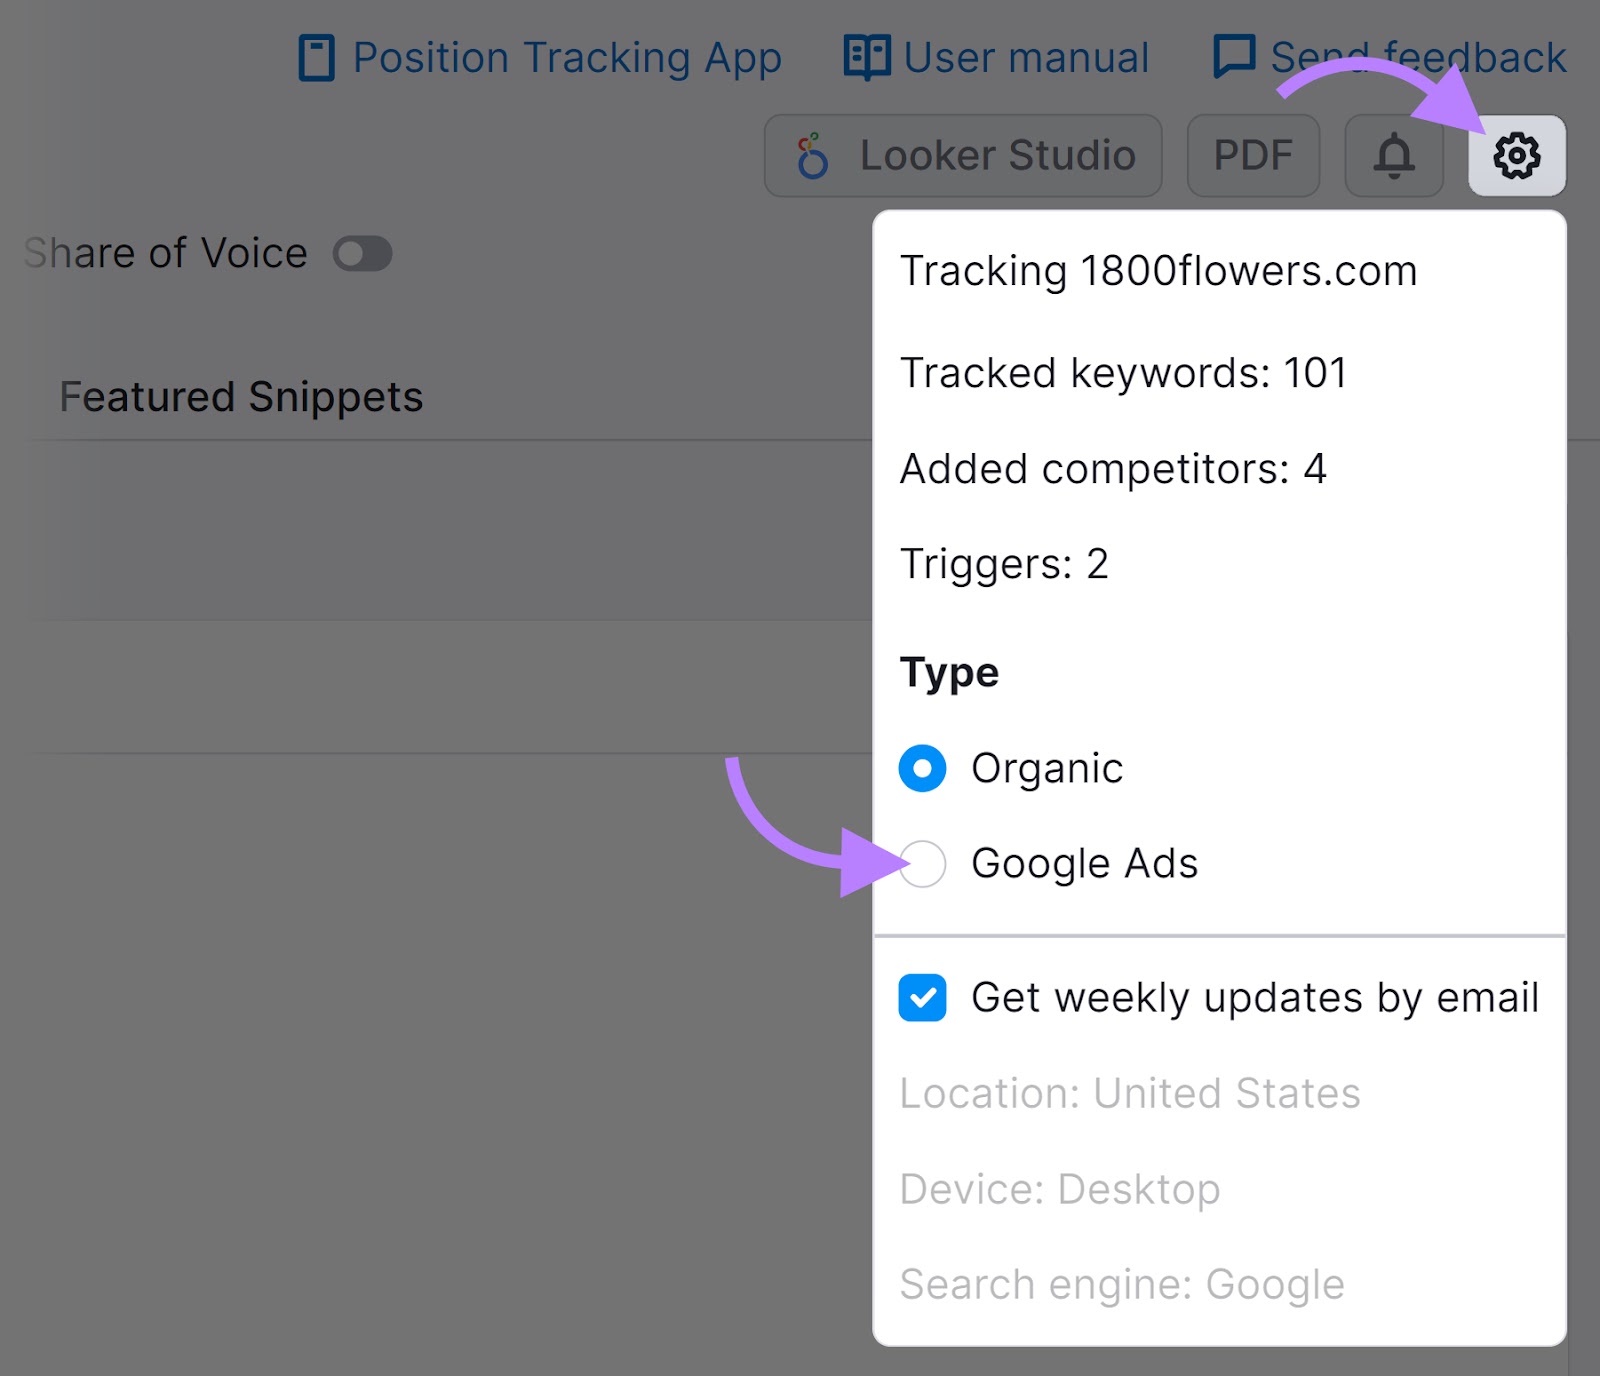 Position Tracking tool showing the gear icon location and an arrow pointing to the "Google Ads" type.